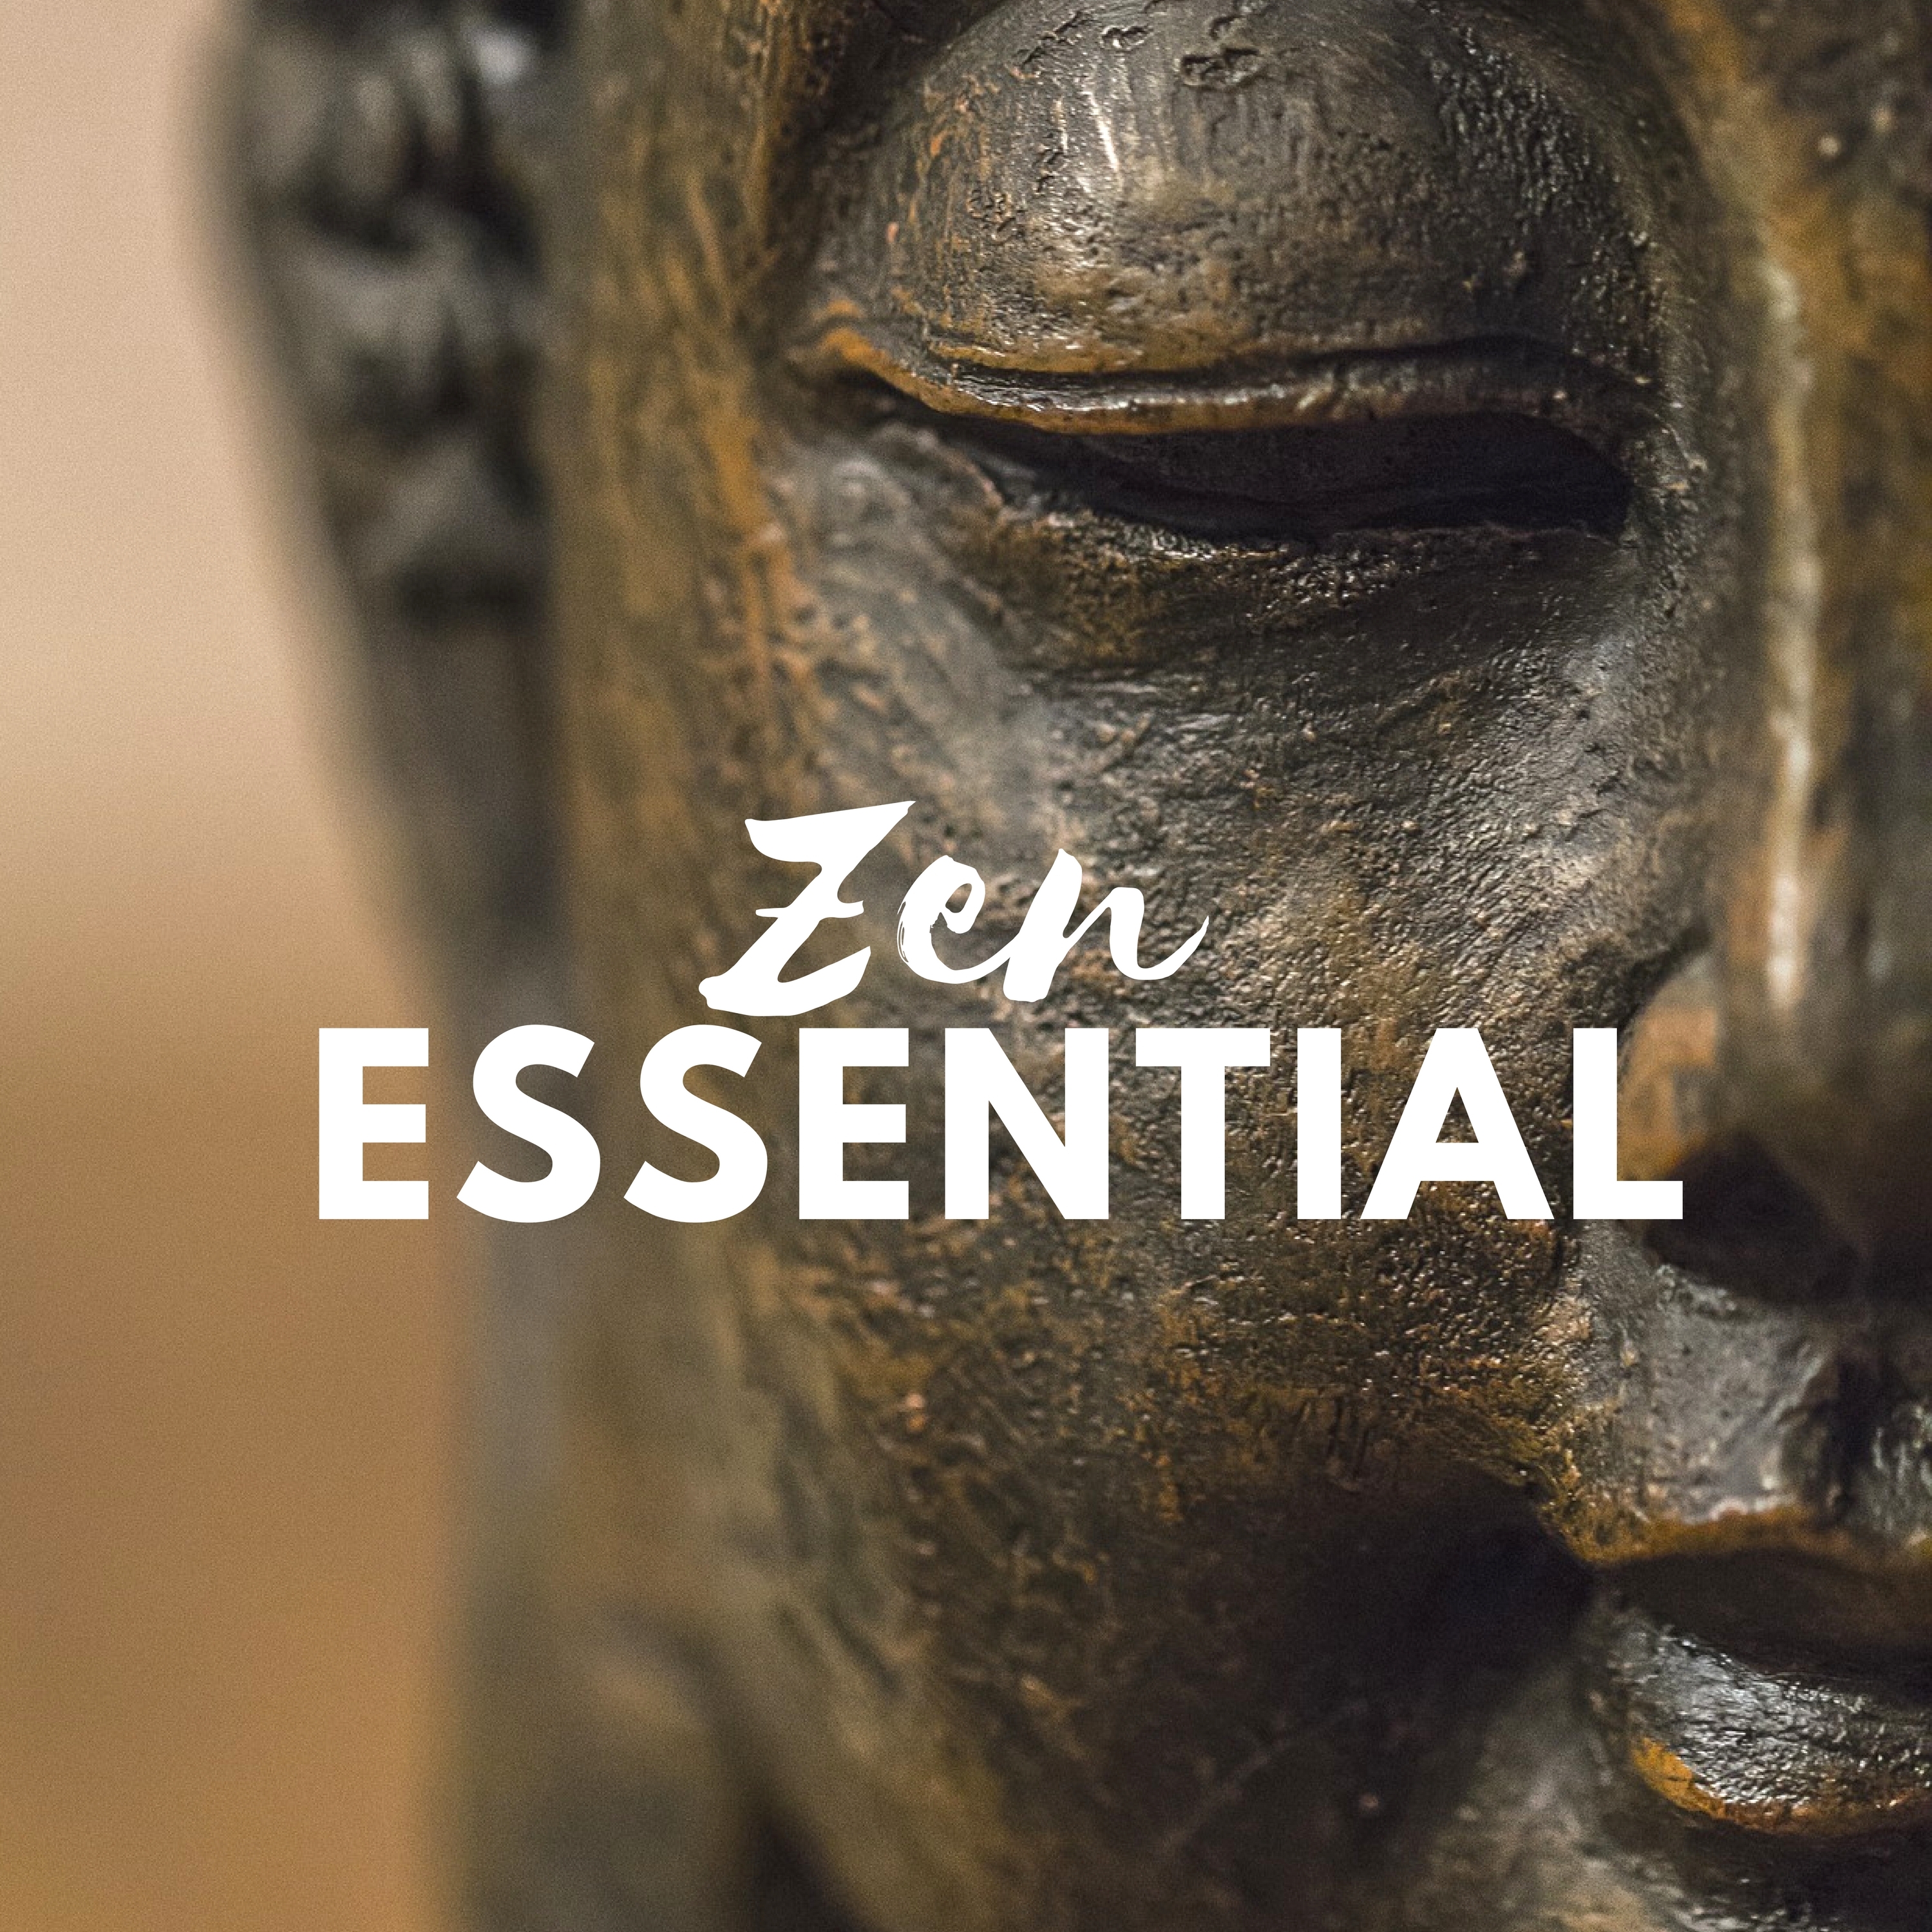 Zen Essential - Deep Relaxation with the Most Relaxing New Age Music